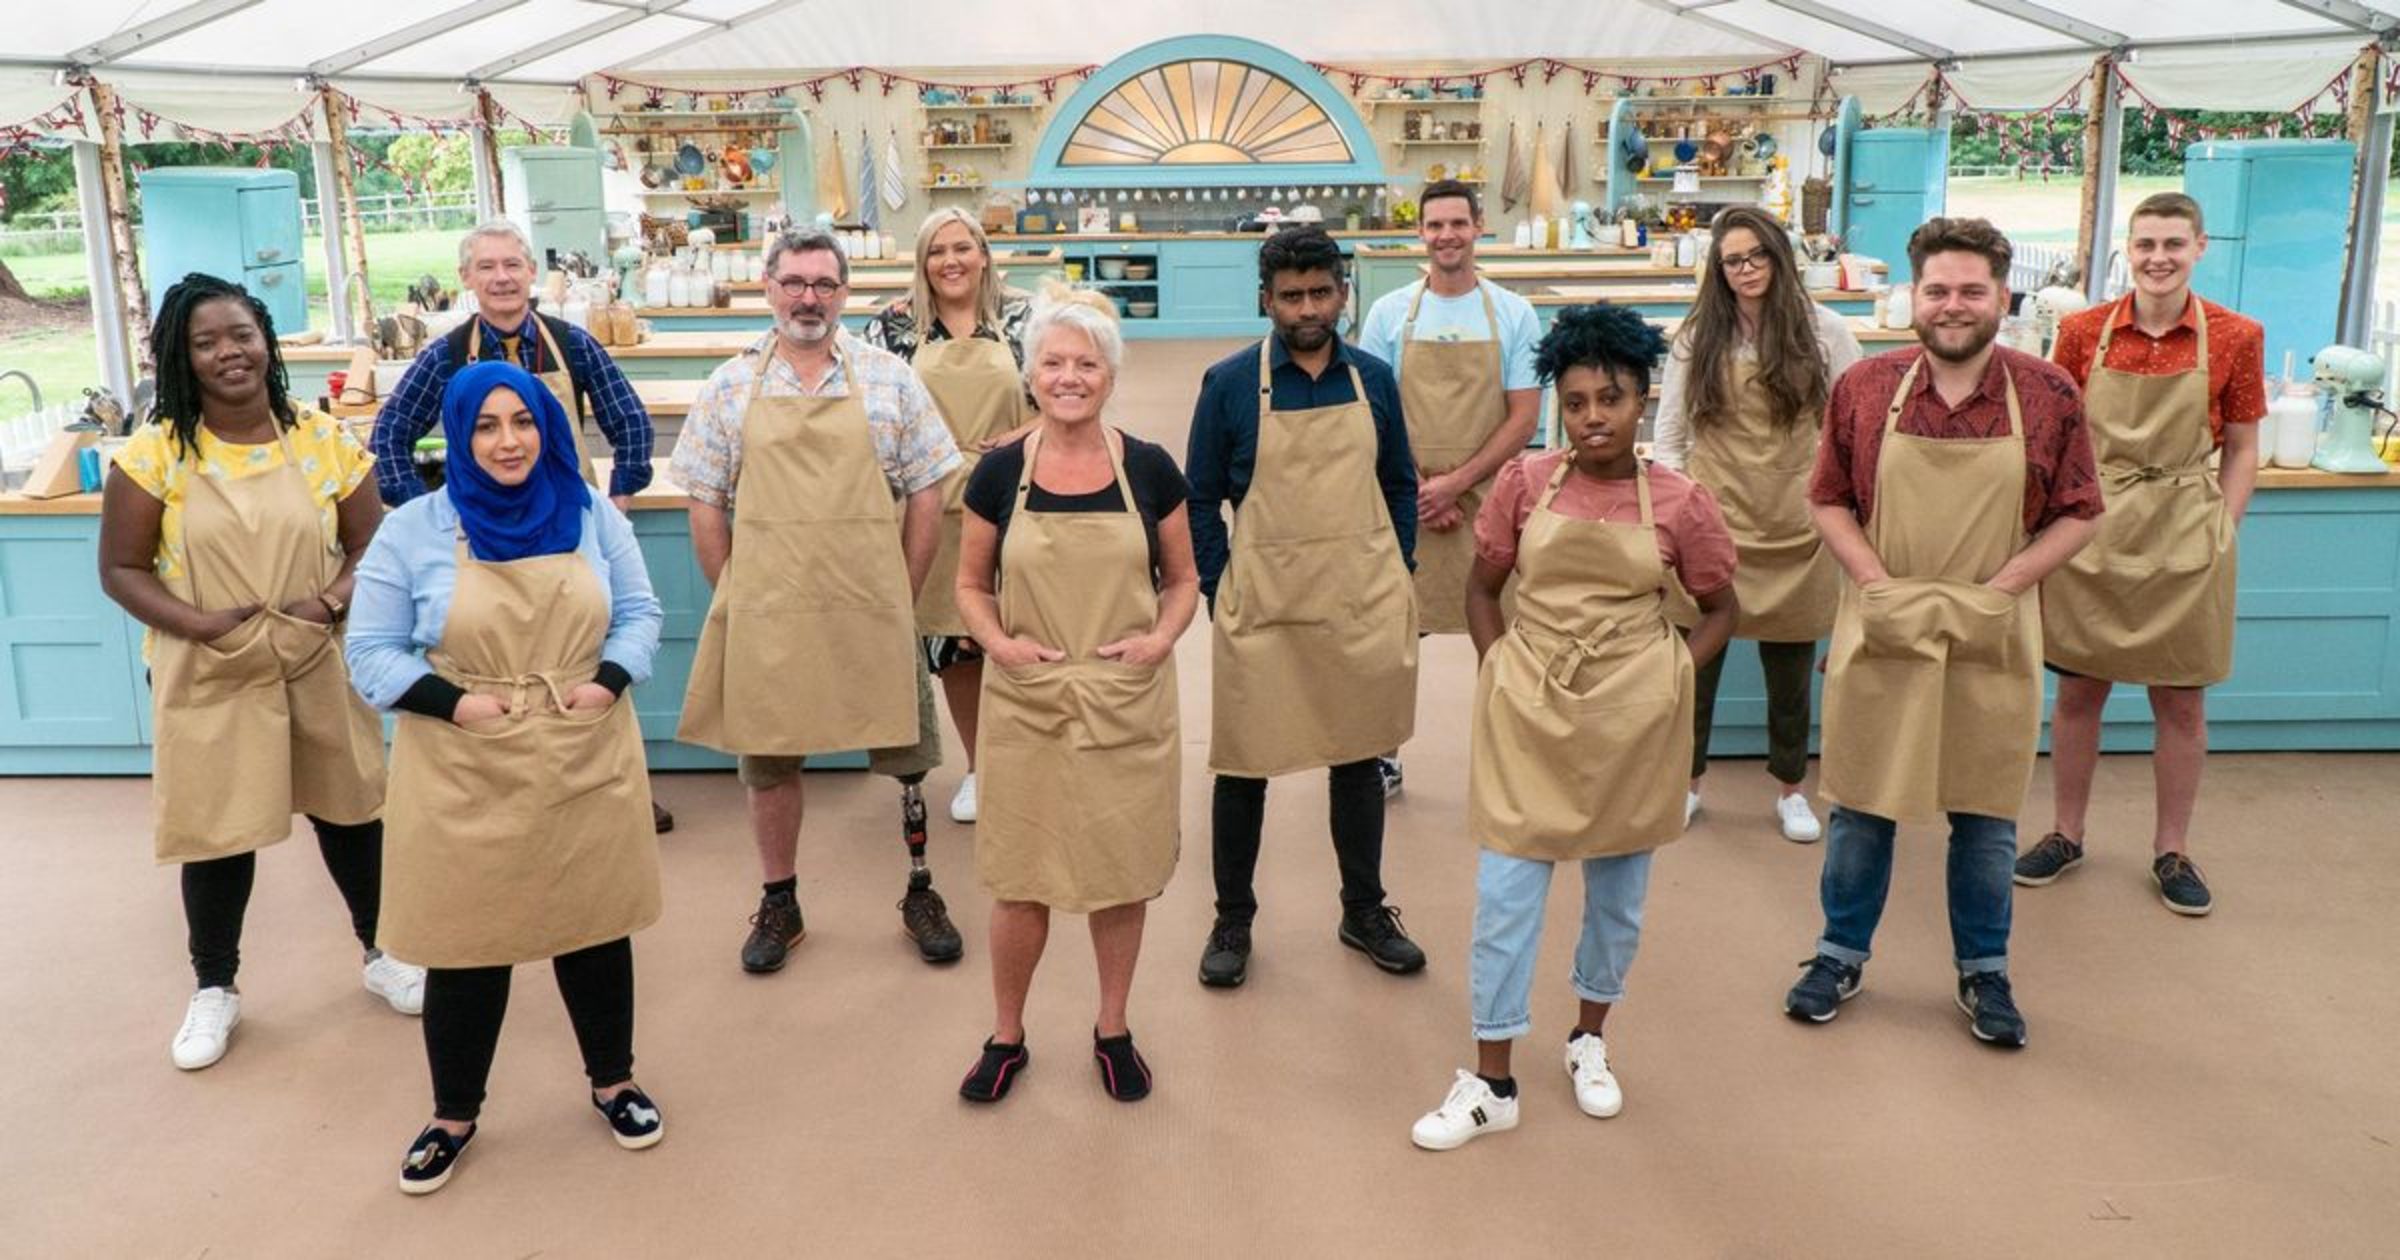 Bullying in pastry land? Latest drama from 'The Great British BakeOff